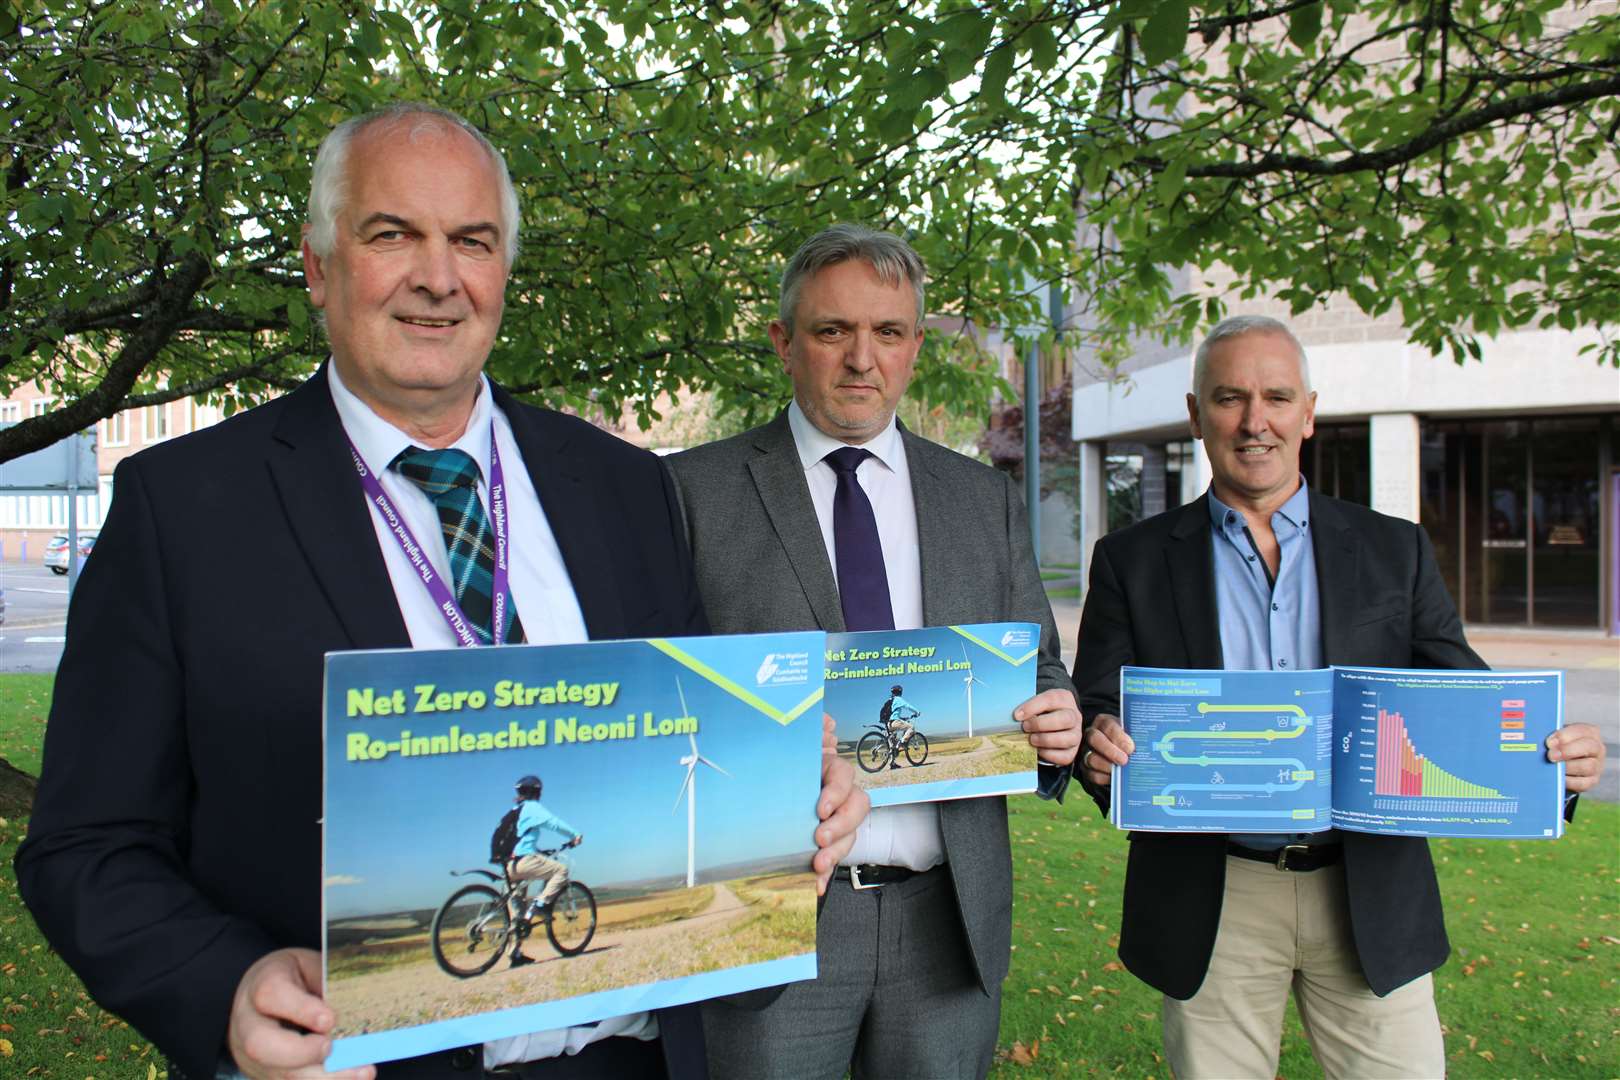 Green trio (from left) council leader Raymond Bremner, chief executive Derek Brown, and chair of climate change committee Karl Rosie.